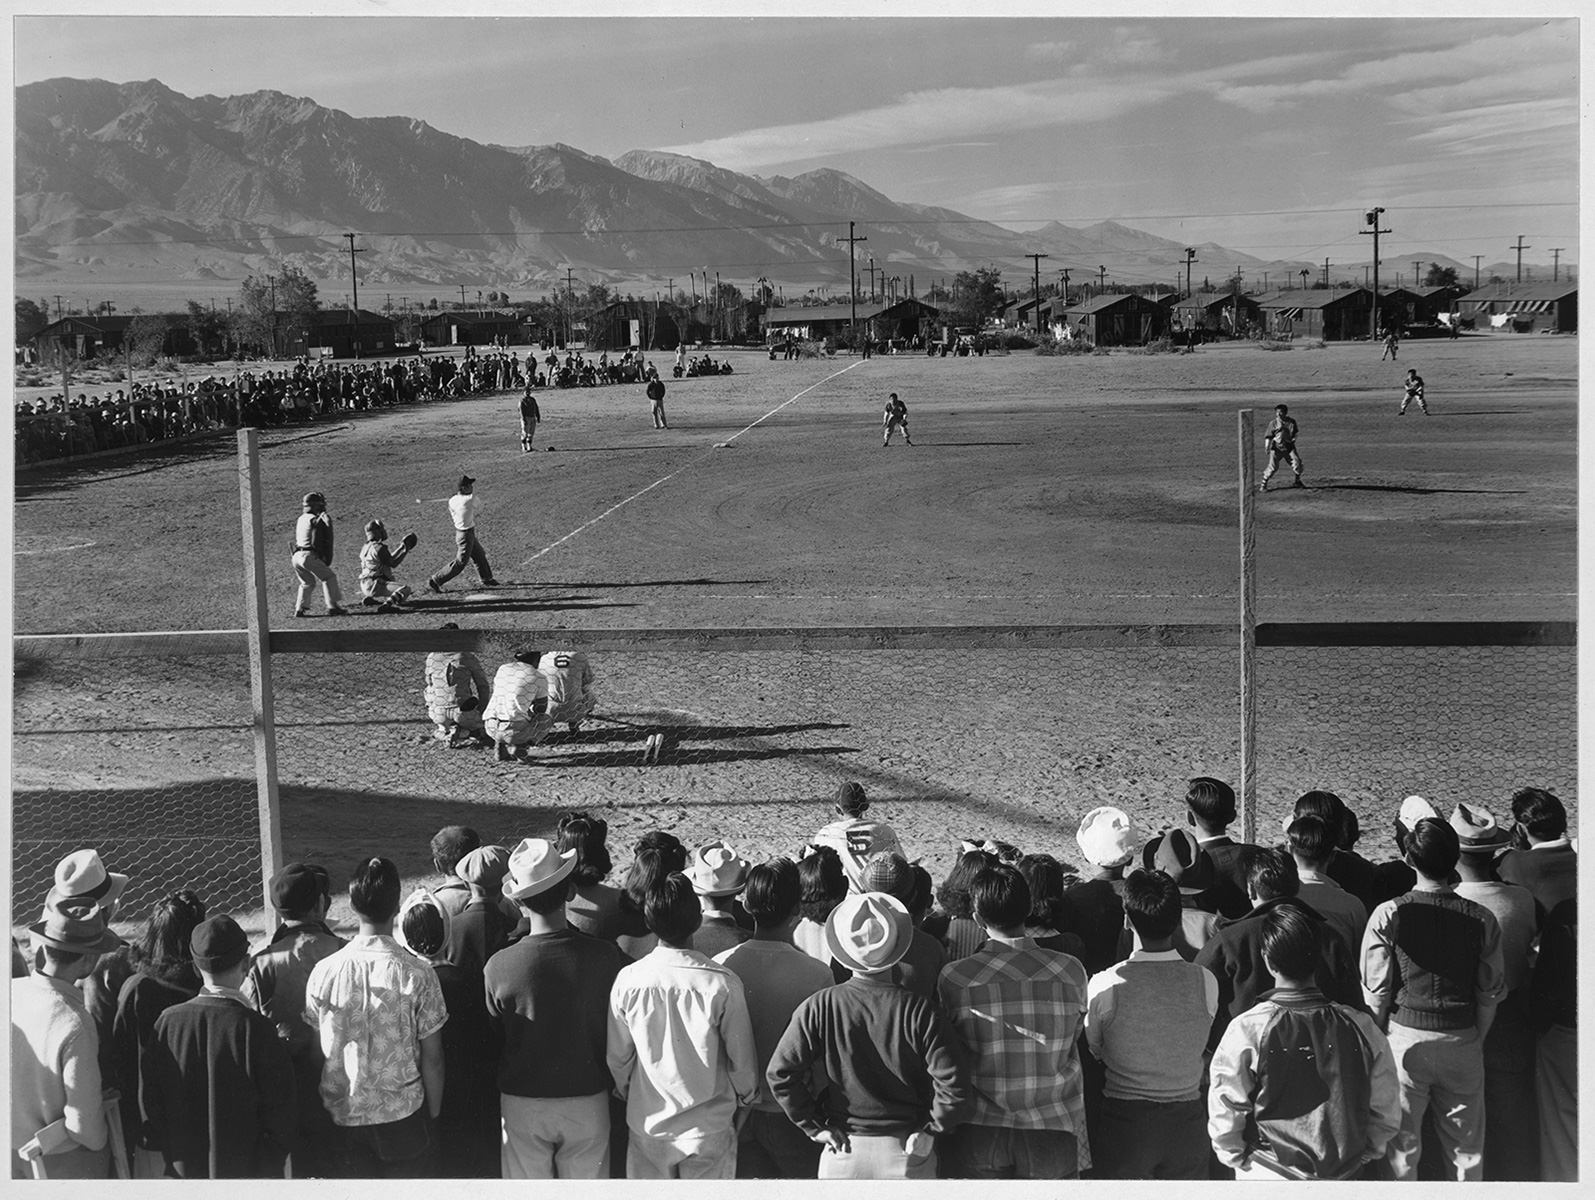 An Ansel Adams photo of baseball at Manazar Relocation Center in 1943